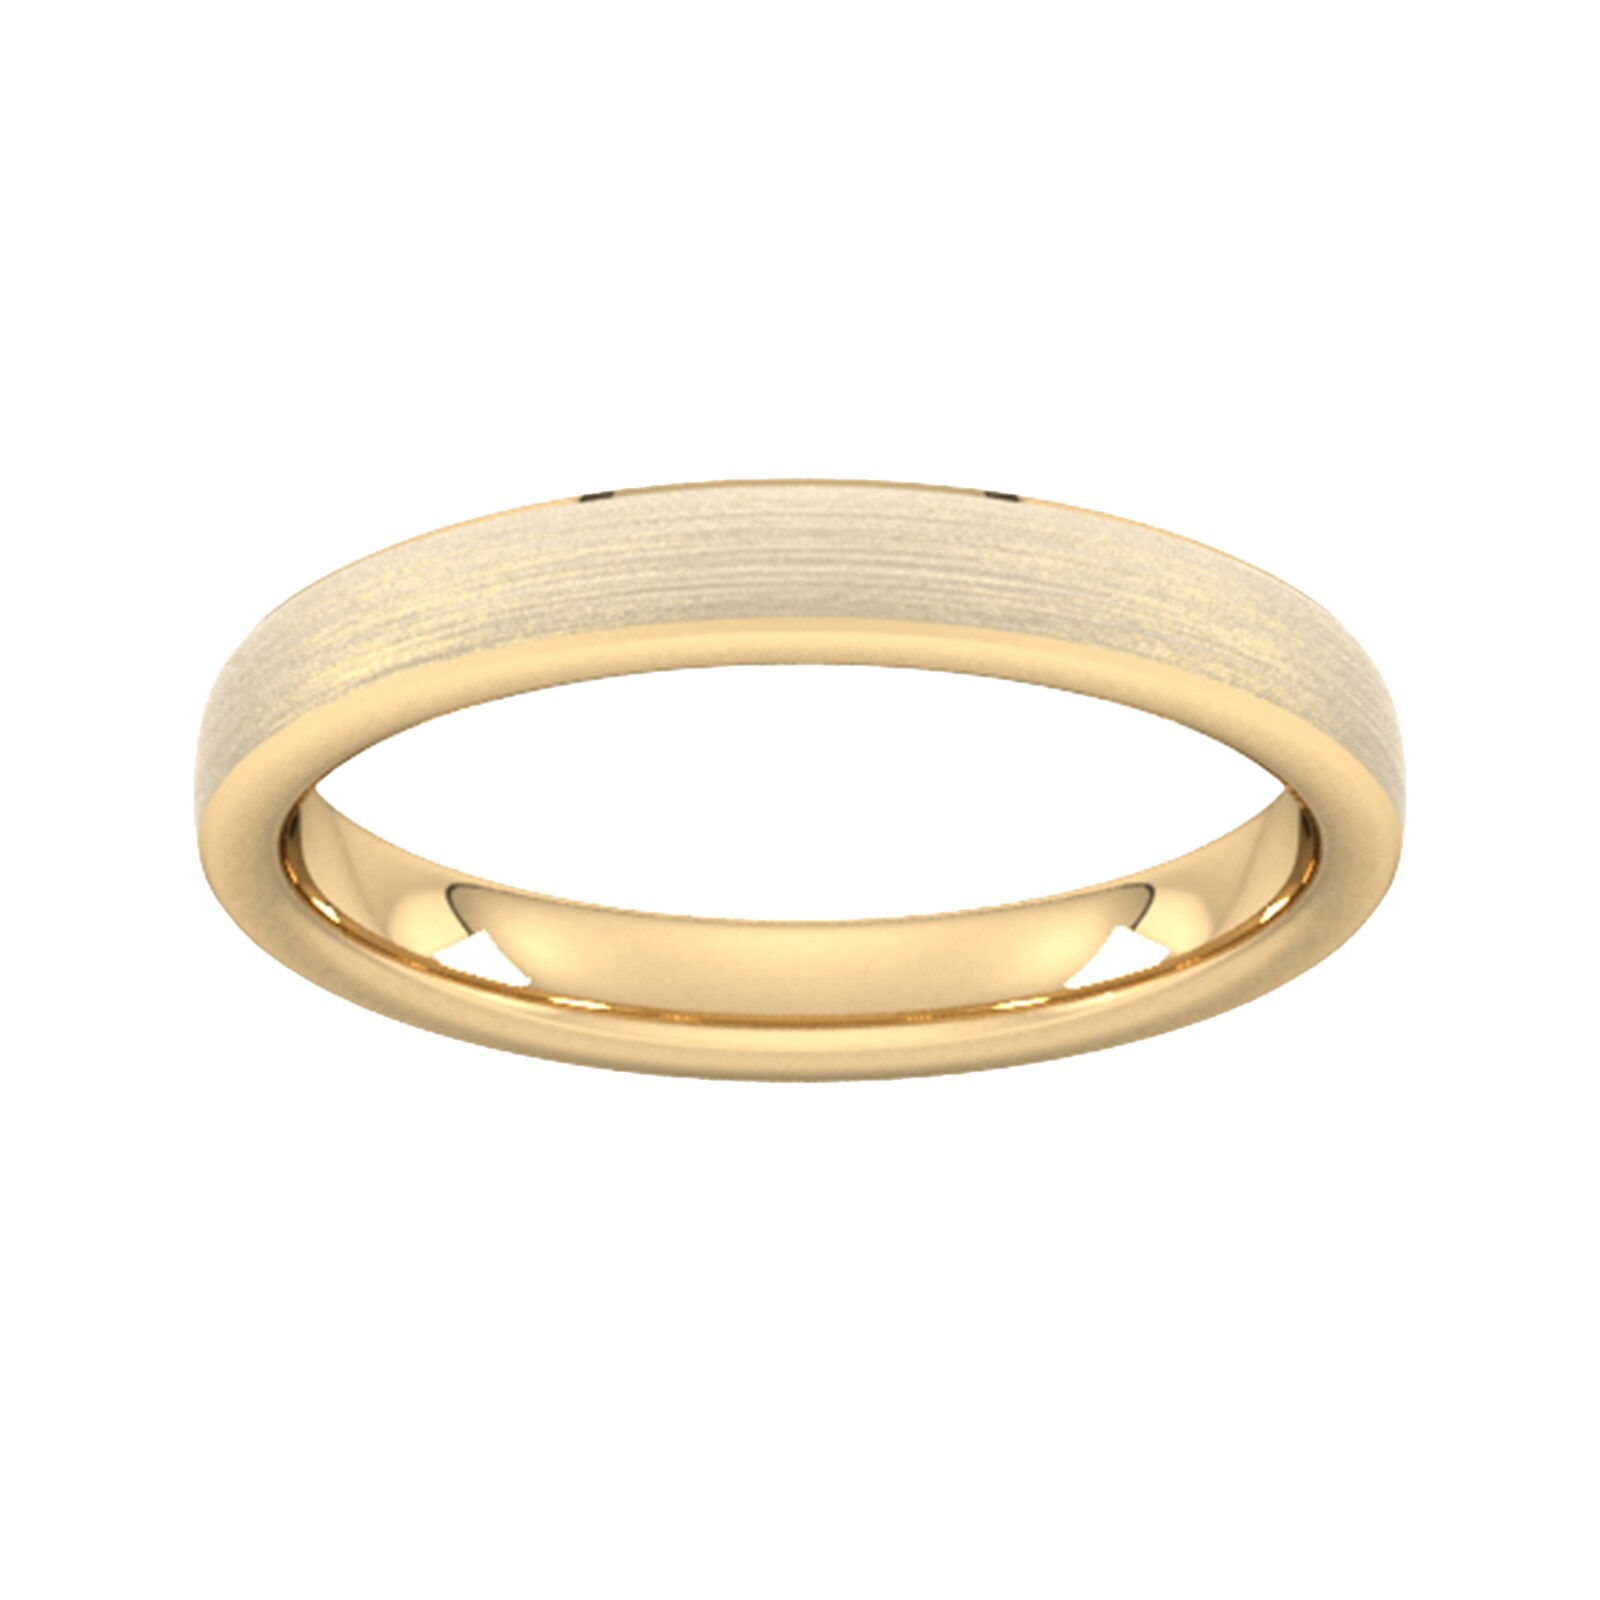 3mm Traditional Court Heavy Polished Chamfered Edges With Matt Centre Wedding Ring In 9 Carat Yellow Gold - Ring Size V